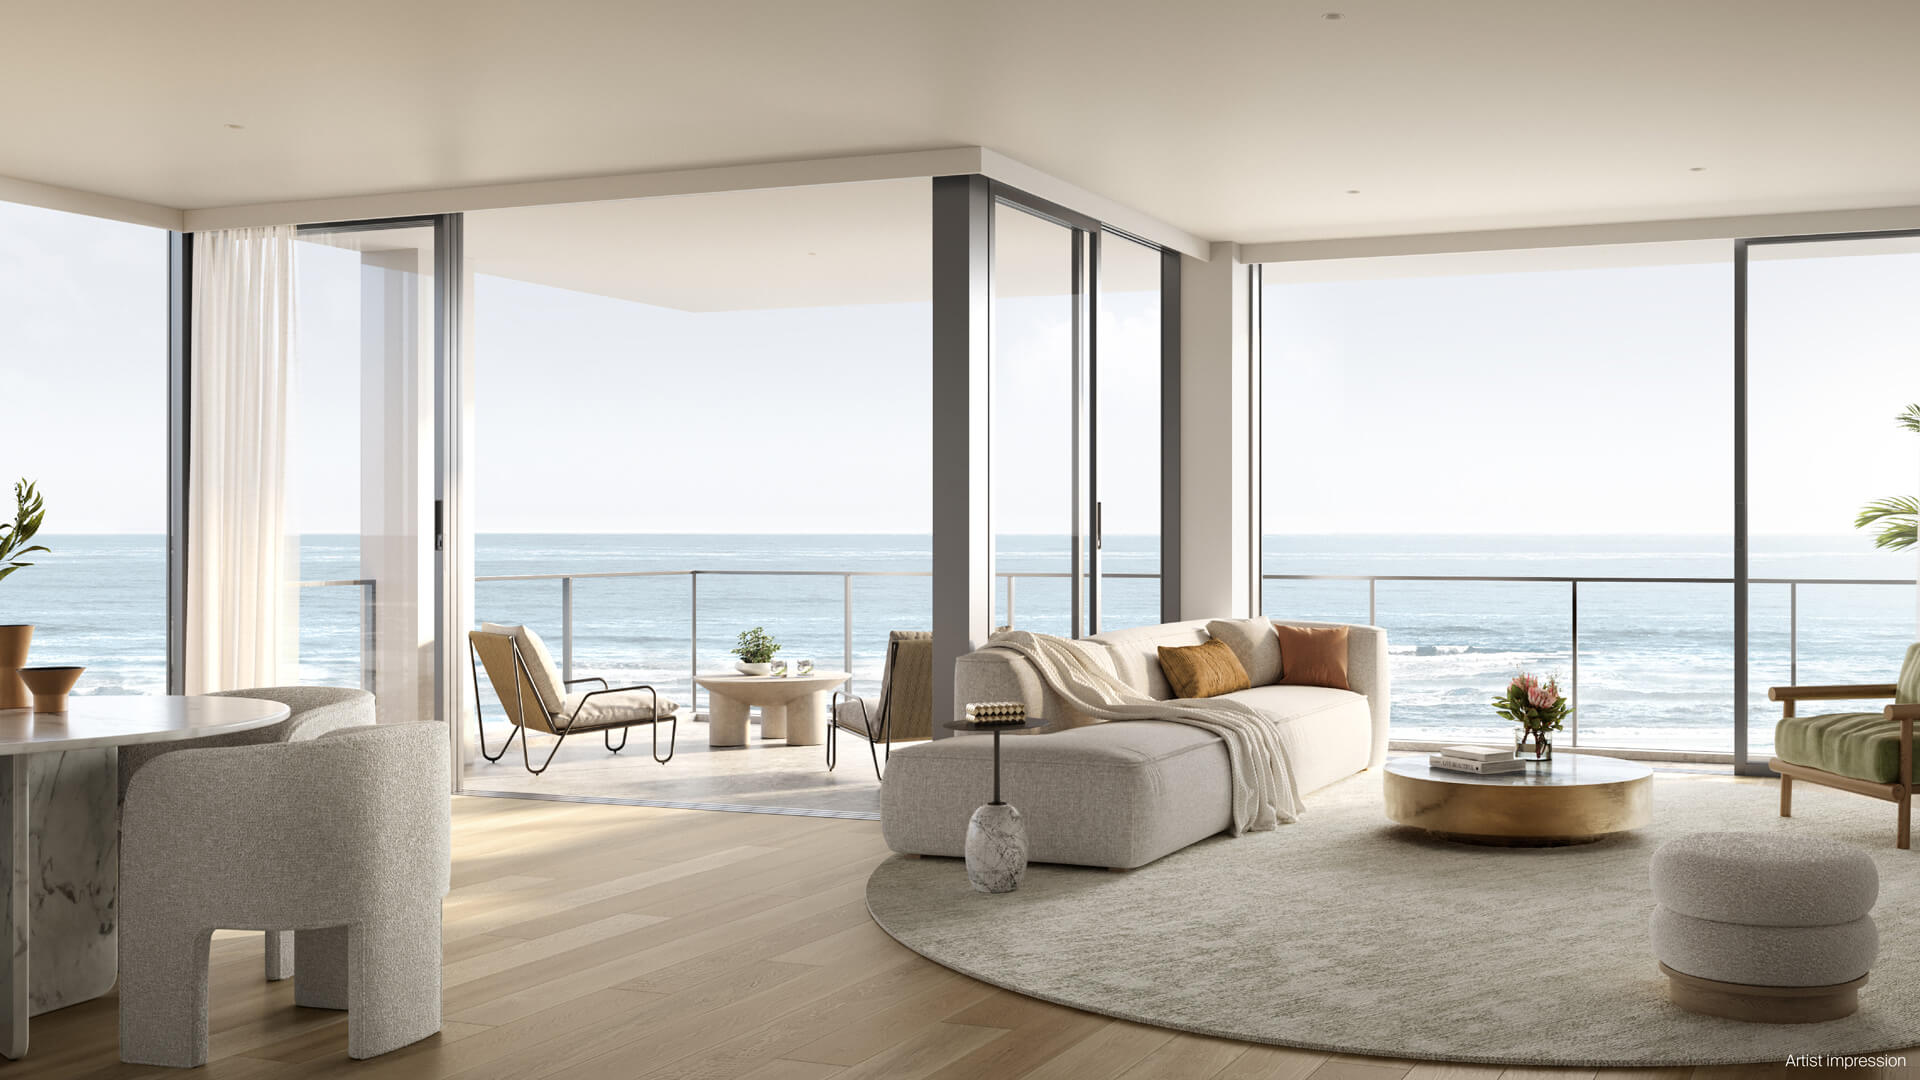 Modern open plan living with glass windows looking out to ocean